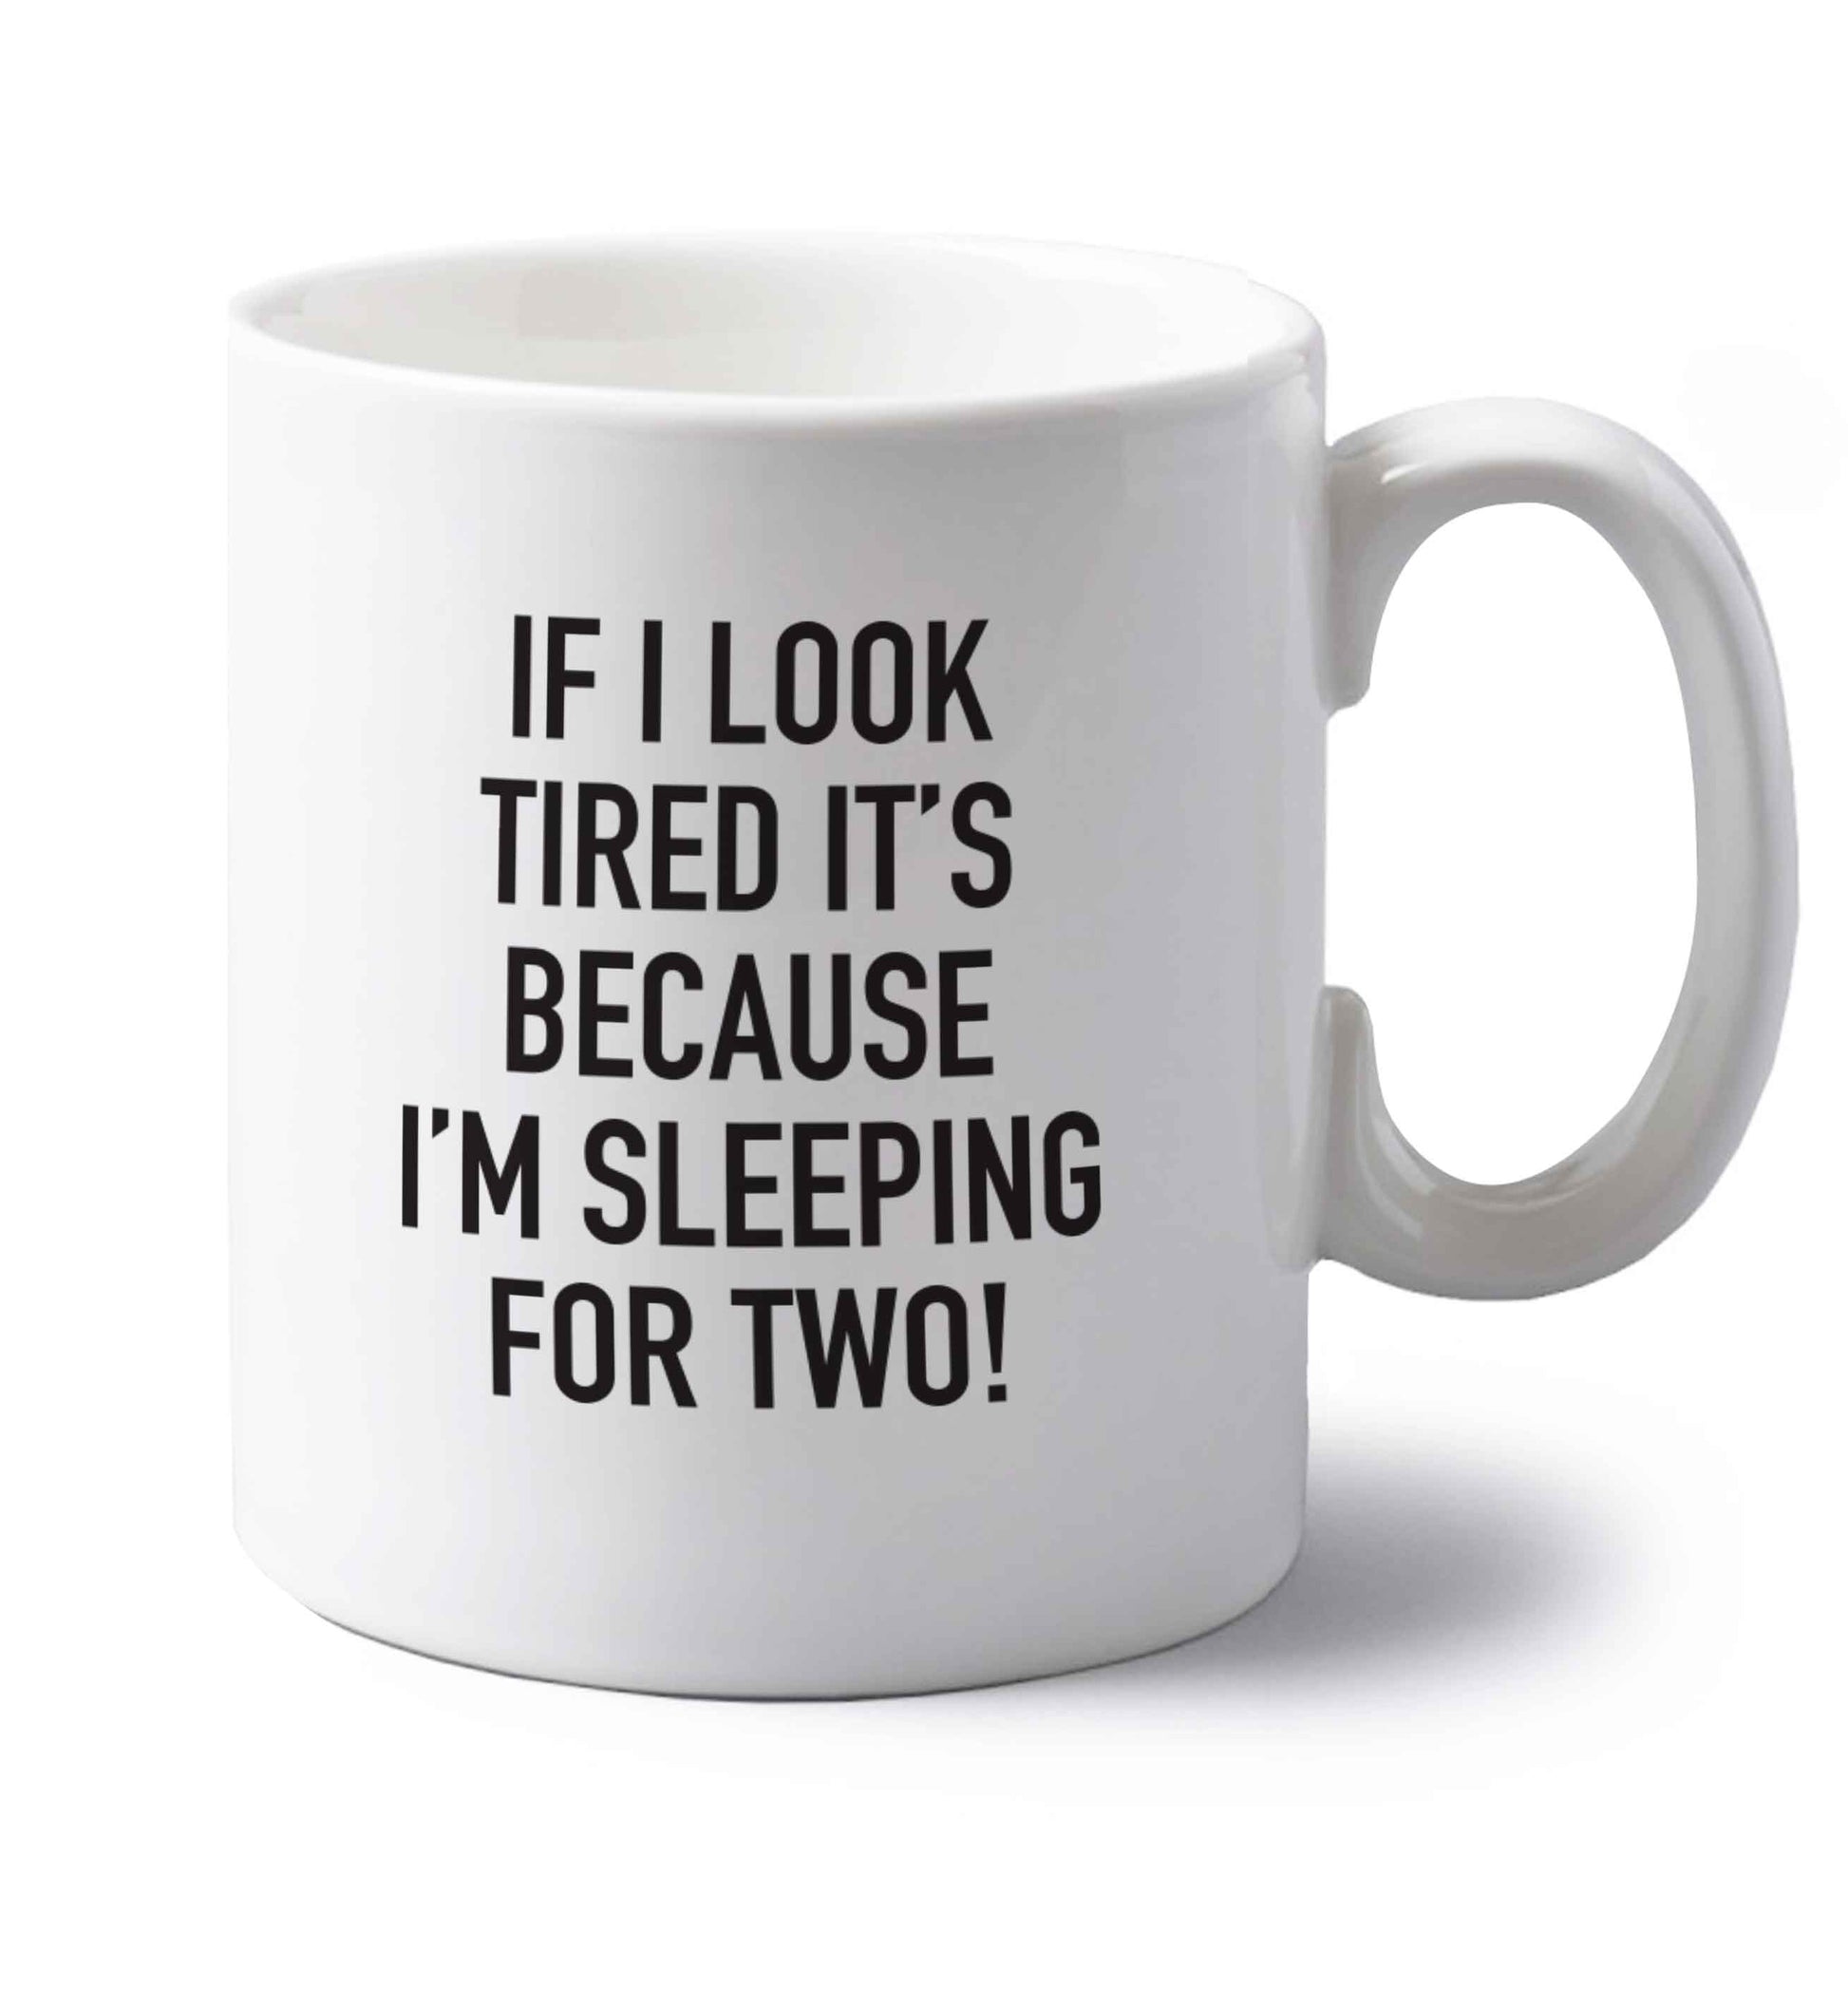 If I look tired it's because I'm sleeping for two left handed white ceramic mug 